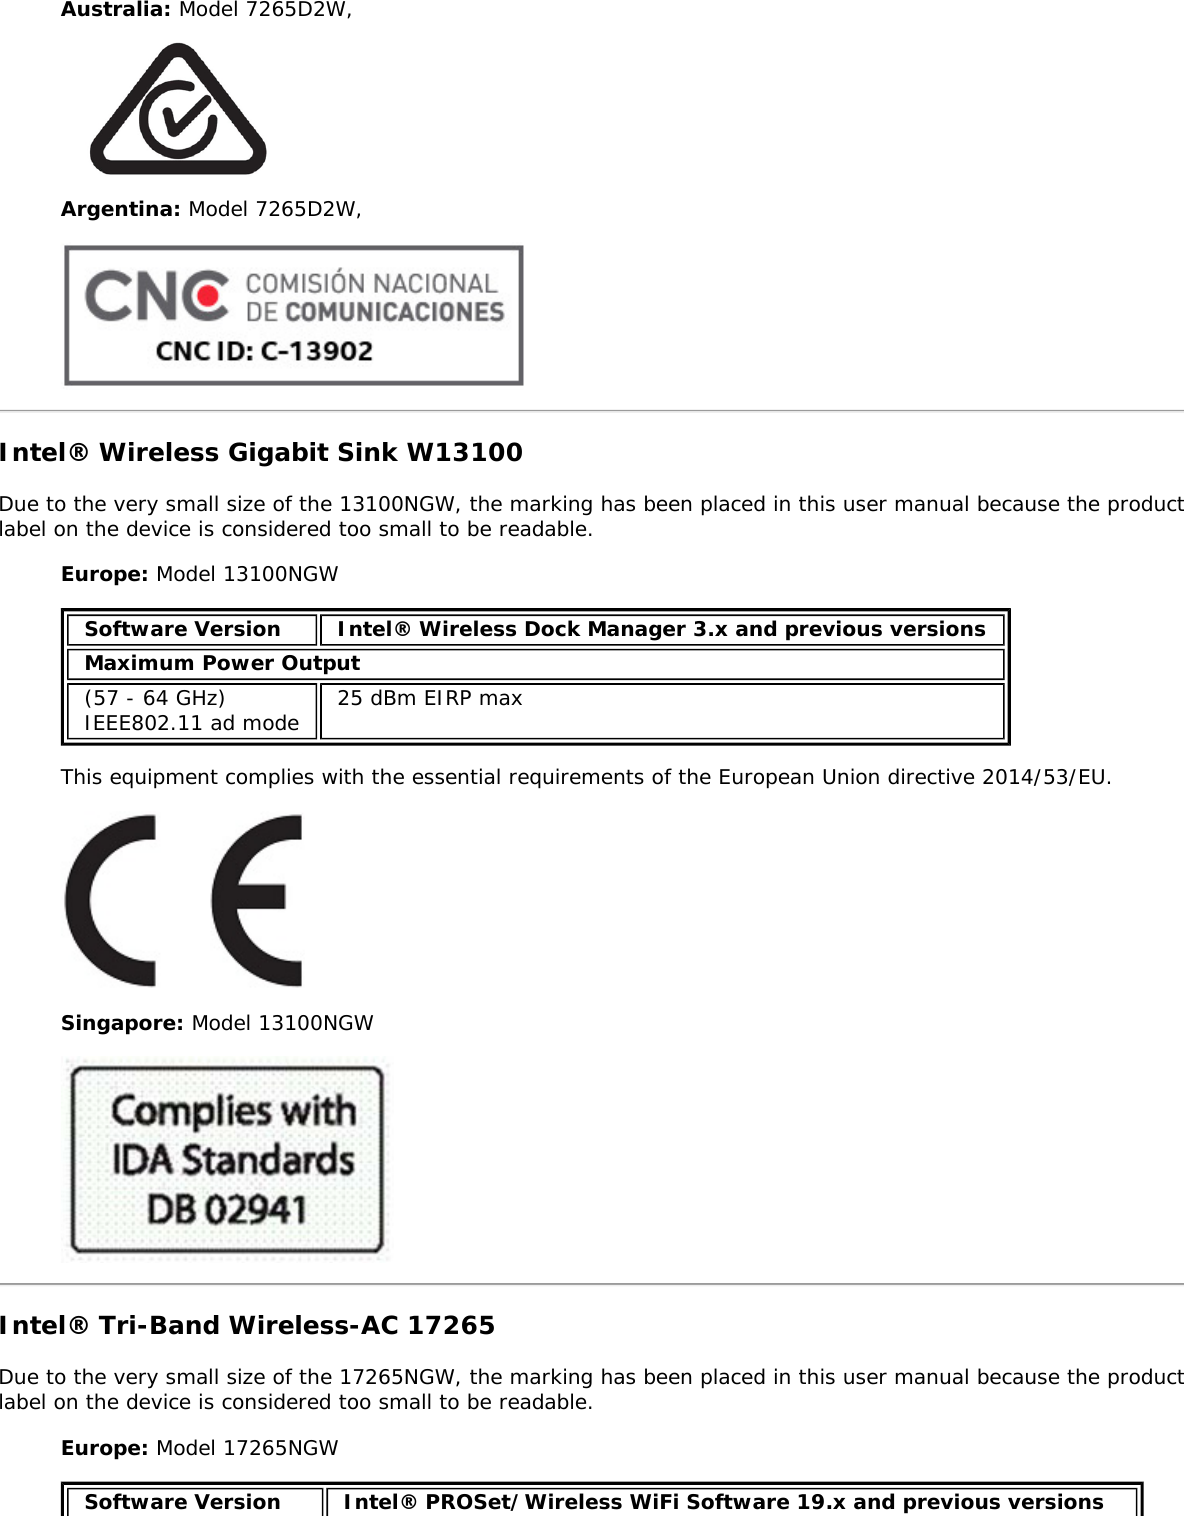 Australia: Model 7265D2W,Argentina: Model 7265D2W,Intel® Wireless Gigabit Sink W13100Due to the very small size of the 13100NGW, the marking has been placed in this user manual because the productlabel on the device is considered too small to be readable.Europe: Model 13100NGWSoftware Version Intel® Wireless Dock Manager 3.x and previous versionsMaximum Power Output(57 - 64 GHz)IEEE802.11 ad mode 25 dBm EIRP maxThis equipment complies with the essential requirements of the European Union directive 2014/53/EU.Singapore: Model 13100NGWIntel® Tri-Band Wireless-AC 17265Due to the very small size of the 17265NGW, the marking has been placed in this user manual because the productlabel on the device is considered too small to be readable.Europe: Model 17265NGWSoftware Version Intel® PROSet/Wireless WiFi Software 19.x and previous versions